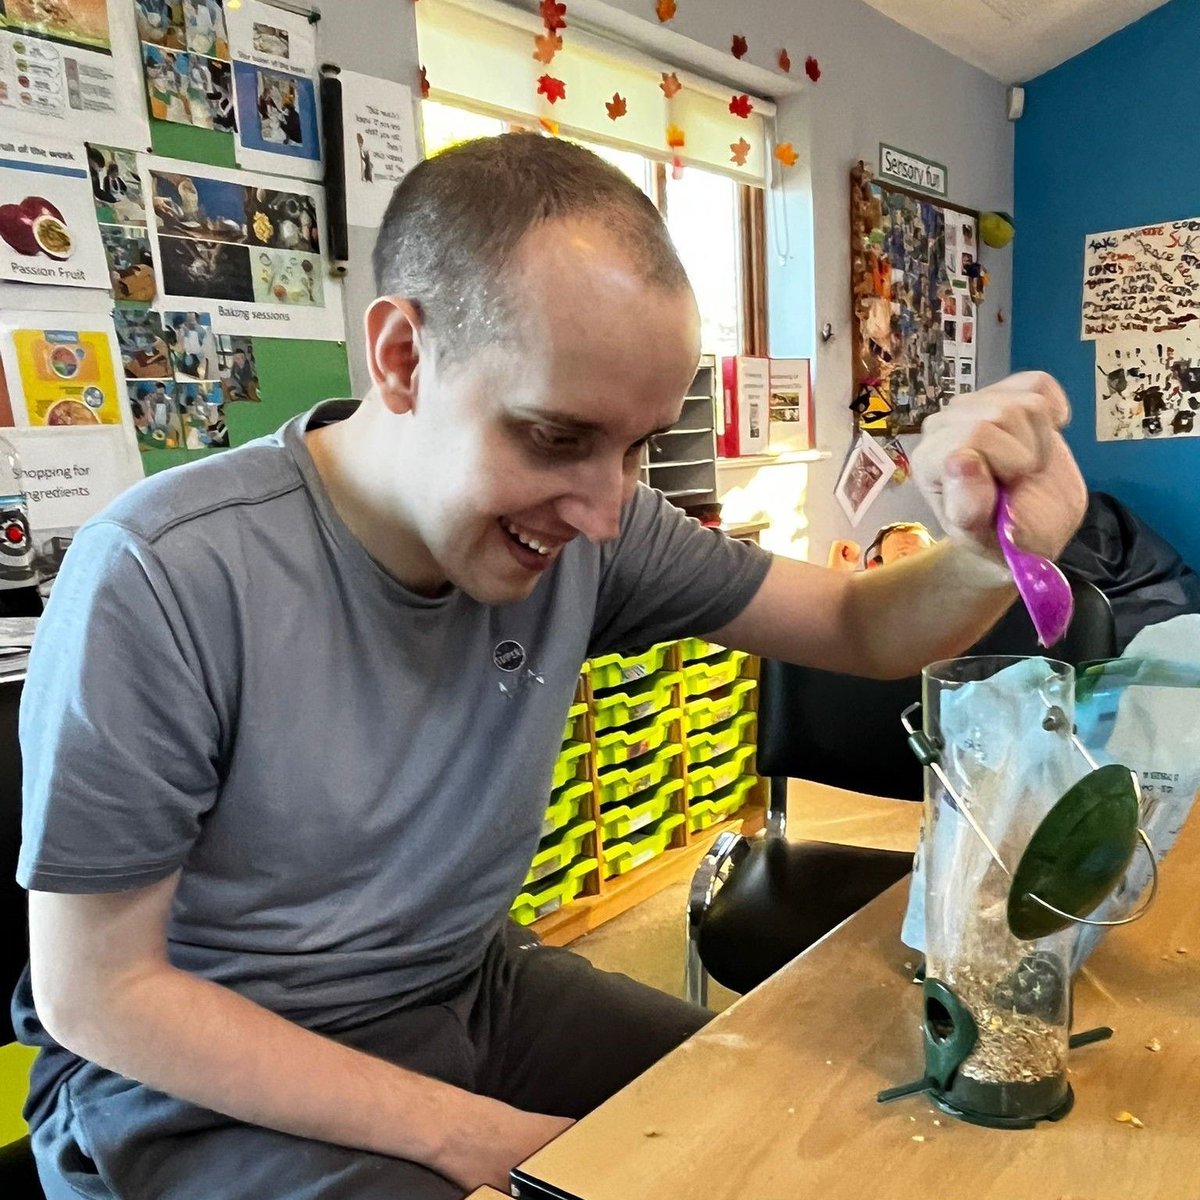 Mildenhall Hub had a great time earlier in the week making fat balls and suet feeders to try and bring more wildlife into their garden! Brilliant work everyone! #LeadTheLifeYouChoose #SocialCare